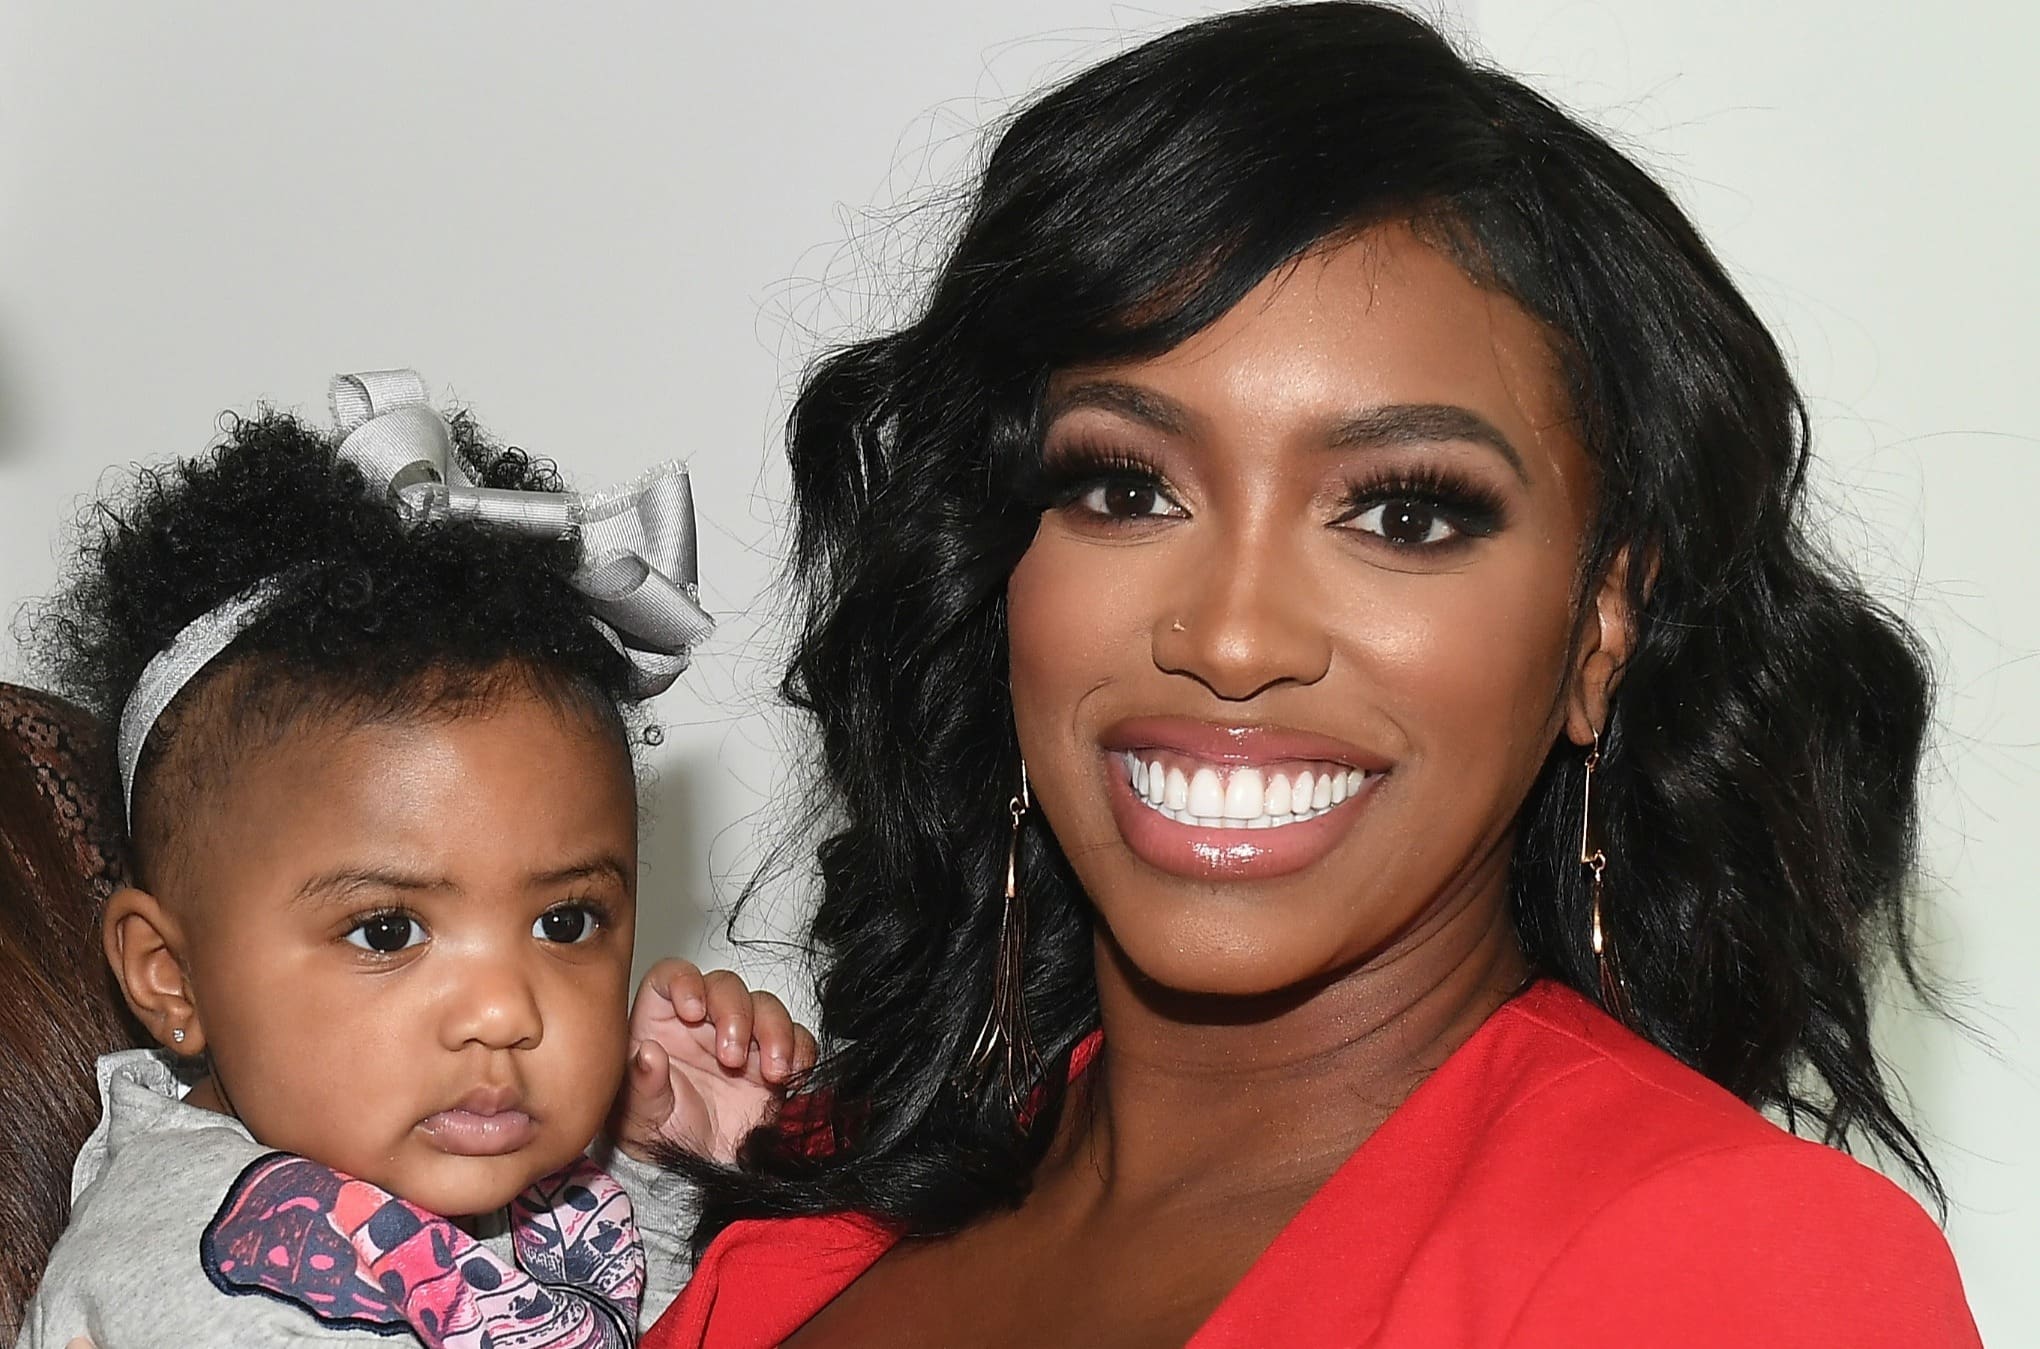 Porsha Williams Makes Fans Happy With A New Set Of Pics Featuring Pilar Jhena